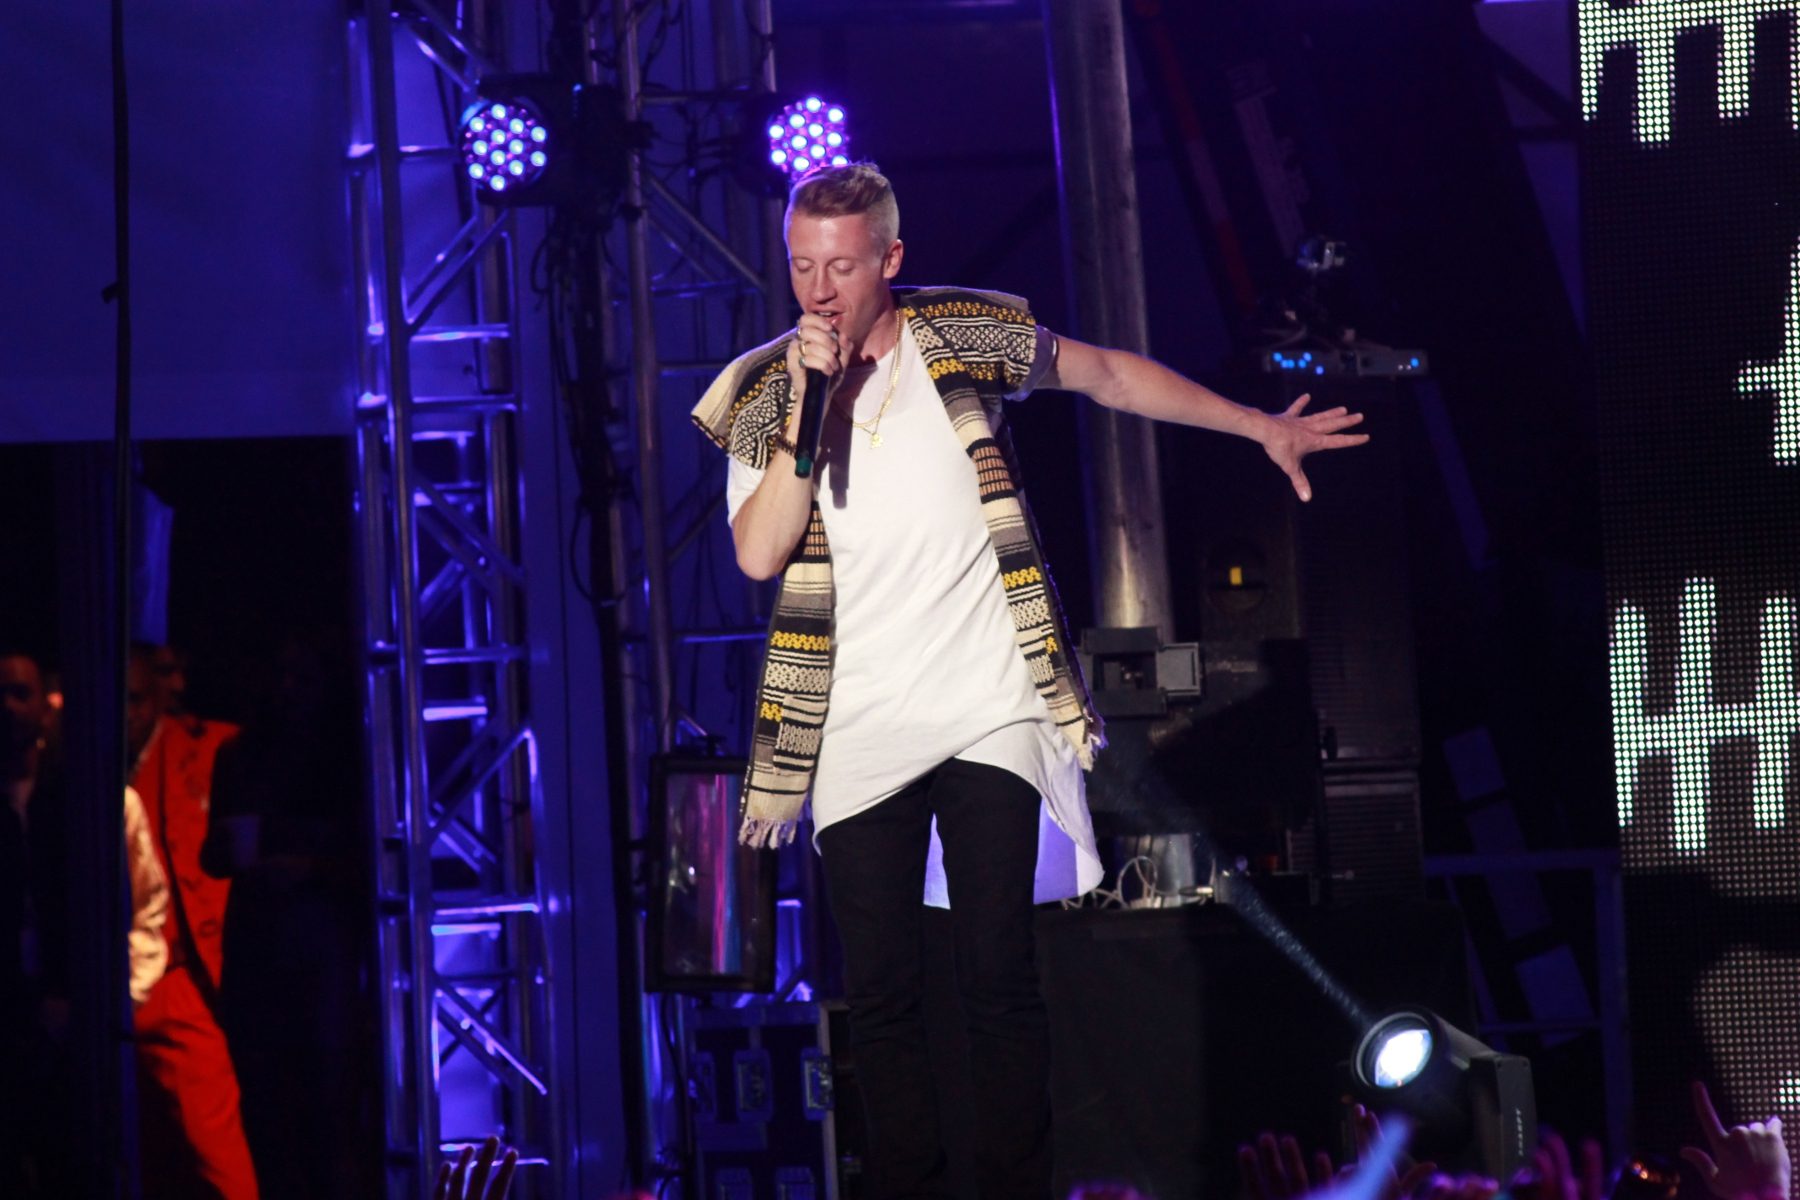 Macklemore Announces New Album BEN For March 2023 Release, Shares New Song “Faithful” Featuring NLE Choppa